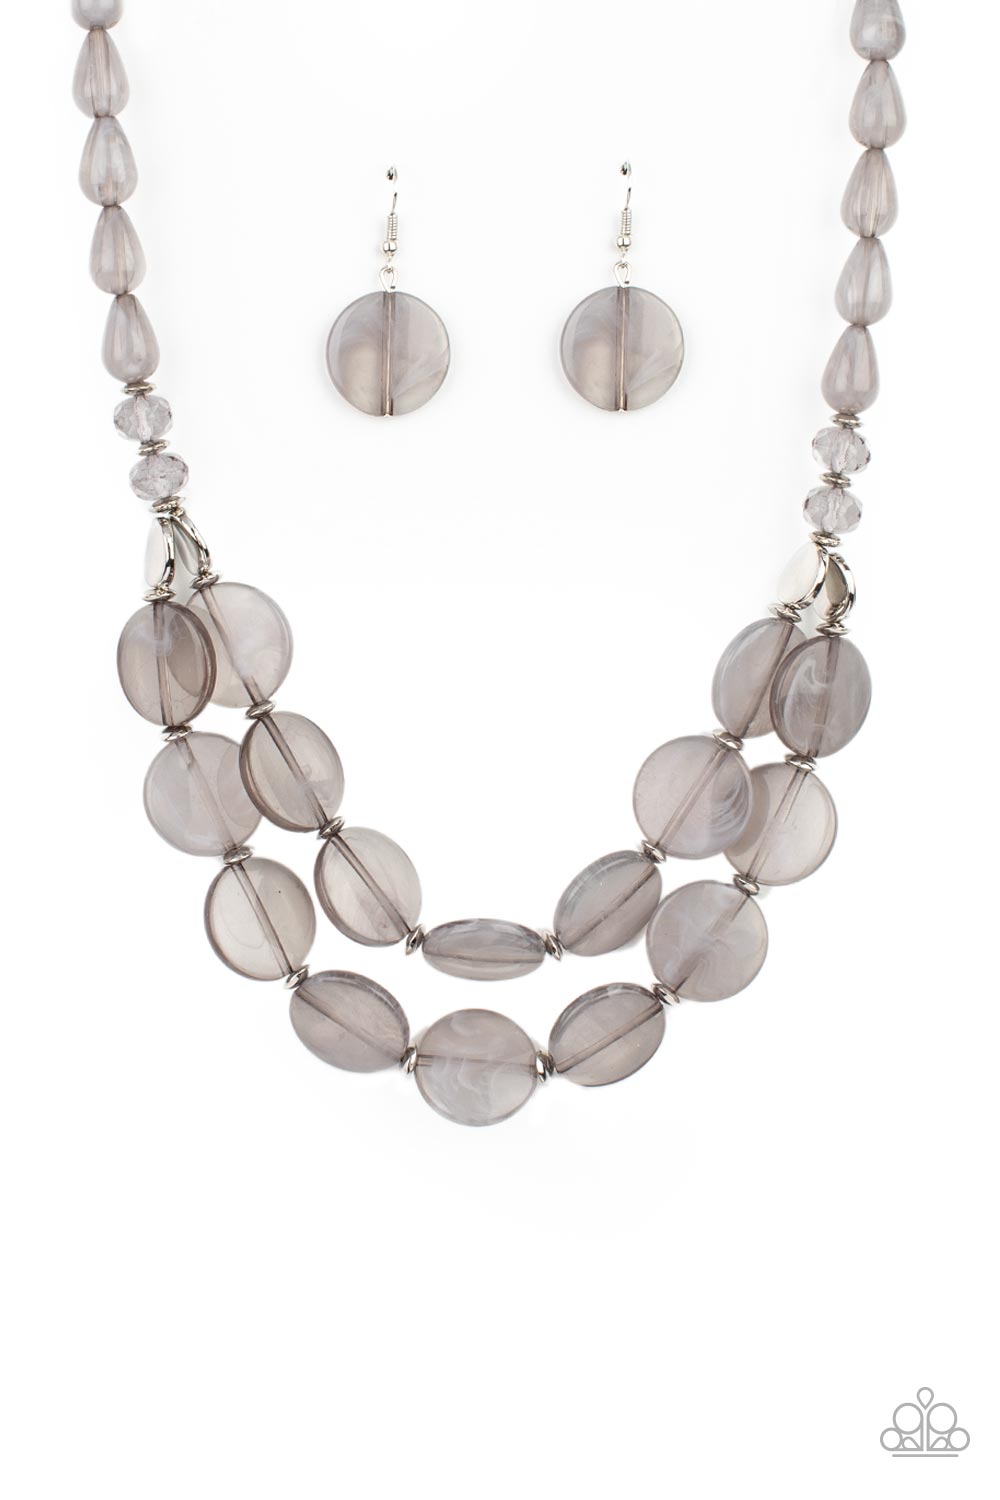 Intermixed with smoky crystal-like beads and shiny silver accents, mismatched cloudy, glassy, and opaque gray teardrop and disc beads layer below the collar 